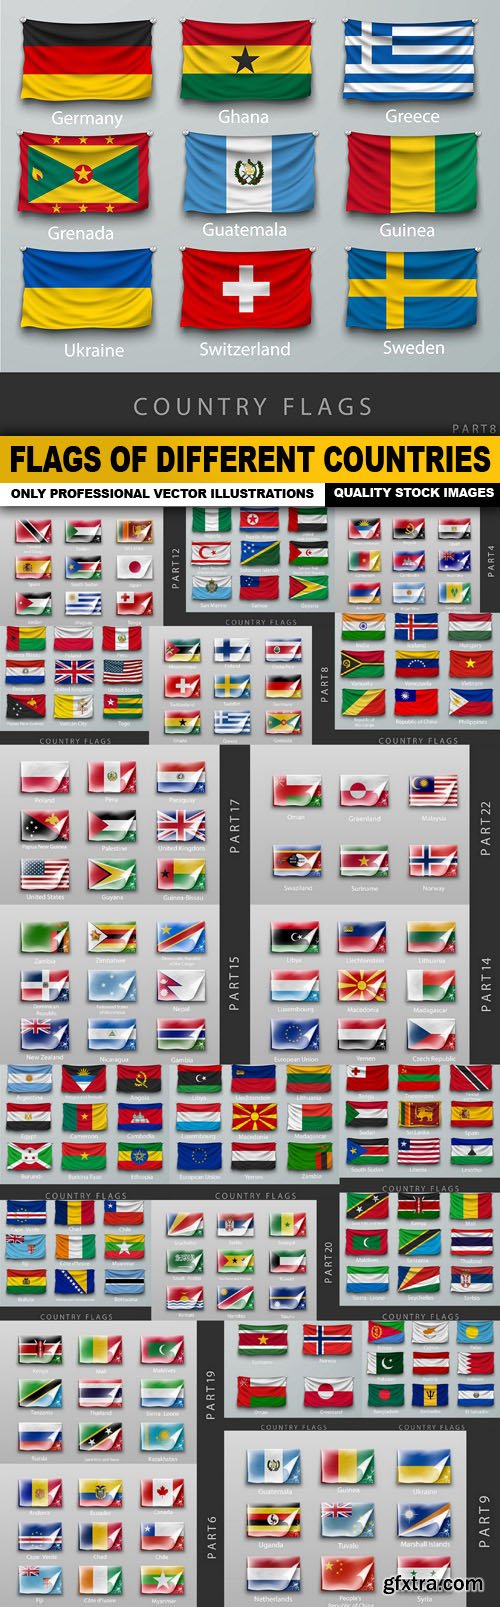 Flags Of Different Countries - 22 Vector